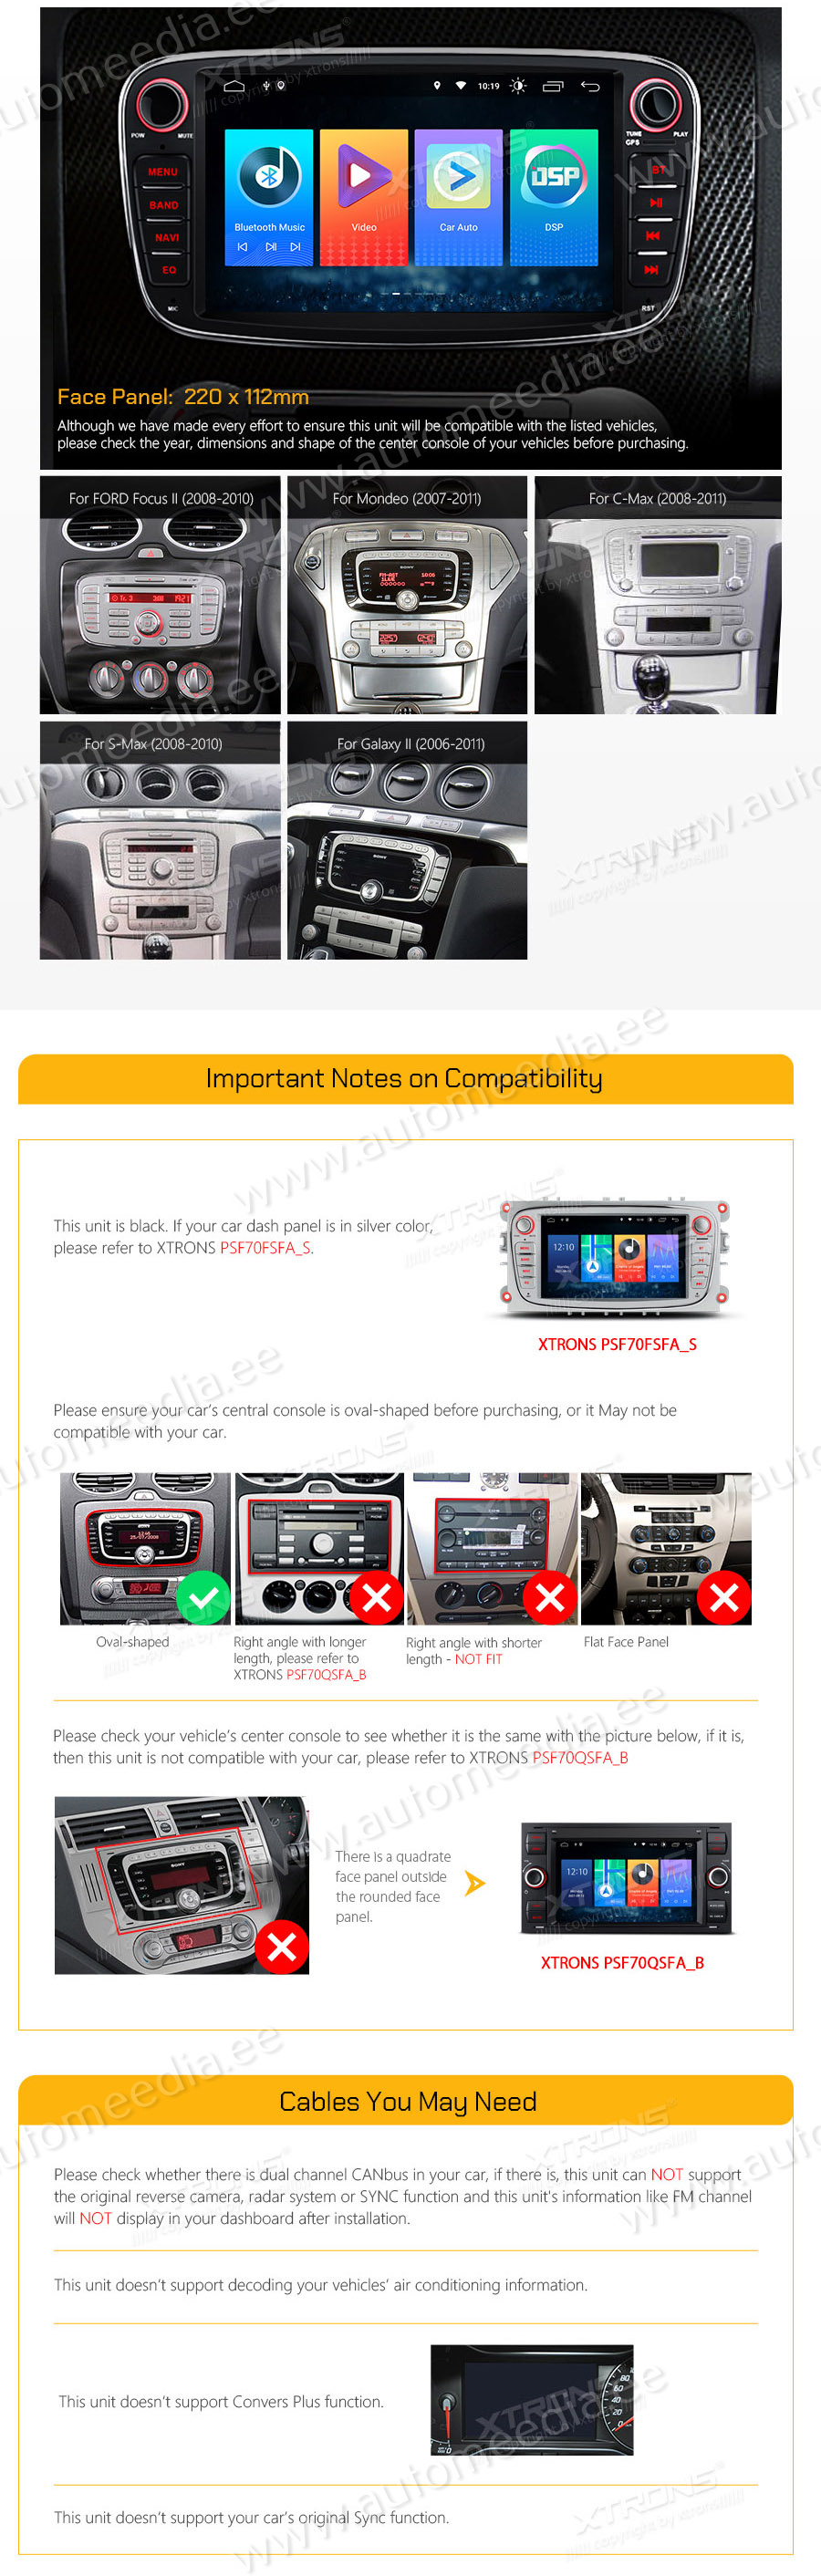 FORD MONDEO (2007-2013)/FOCUS(2008-2011)/S-MAX(2008-2011)/GALAXY(2011-2012)  custom fit multimedia radio suitability for the car